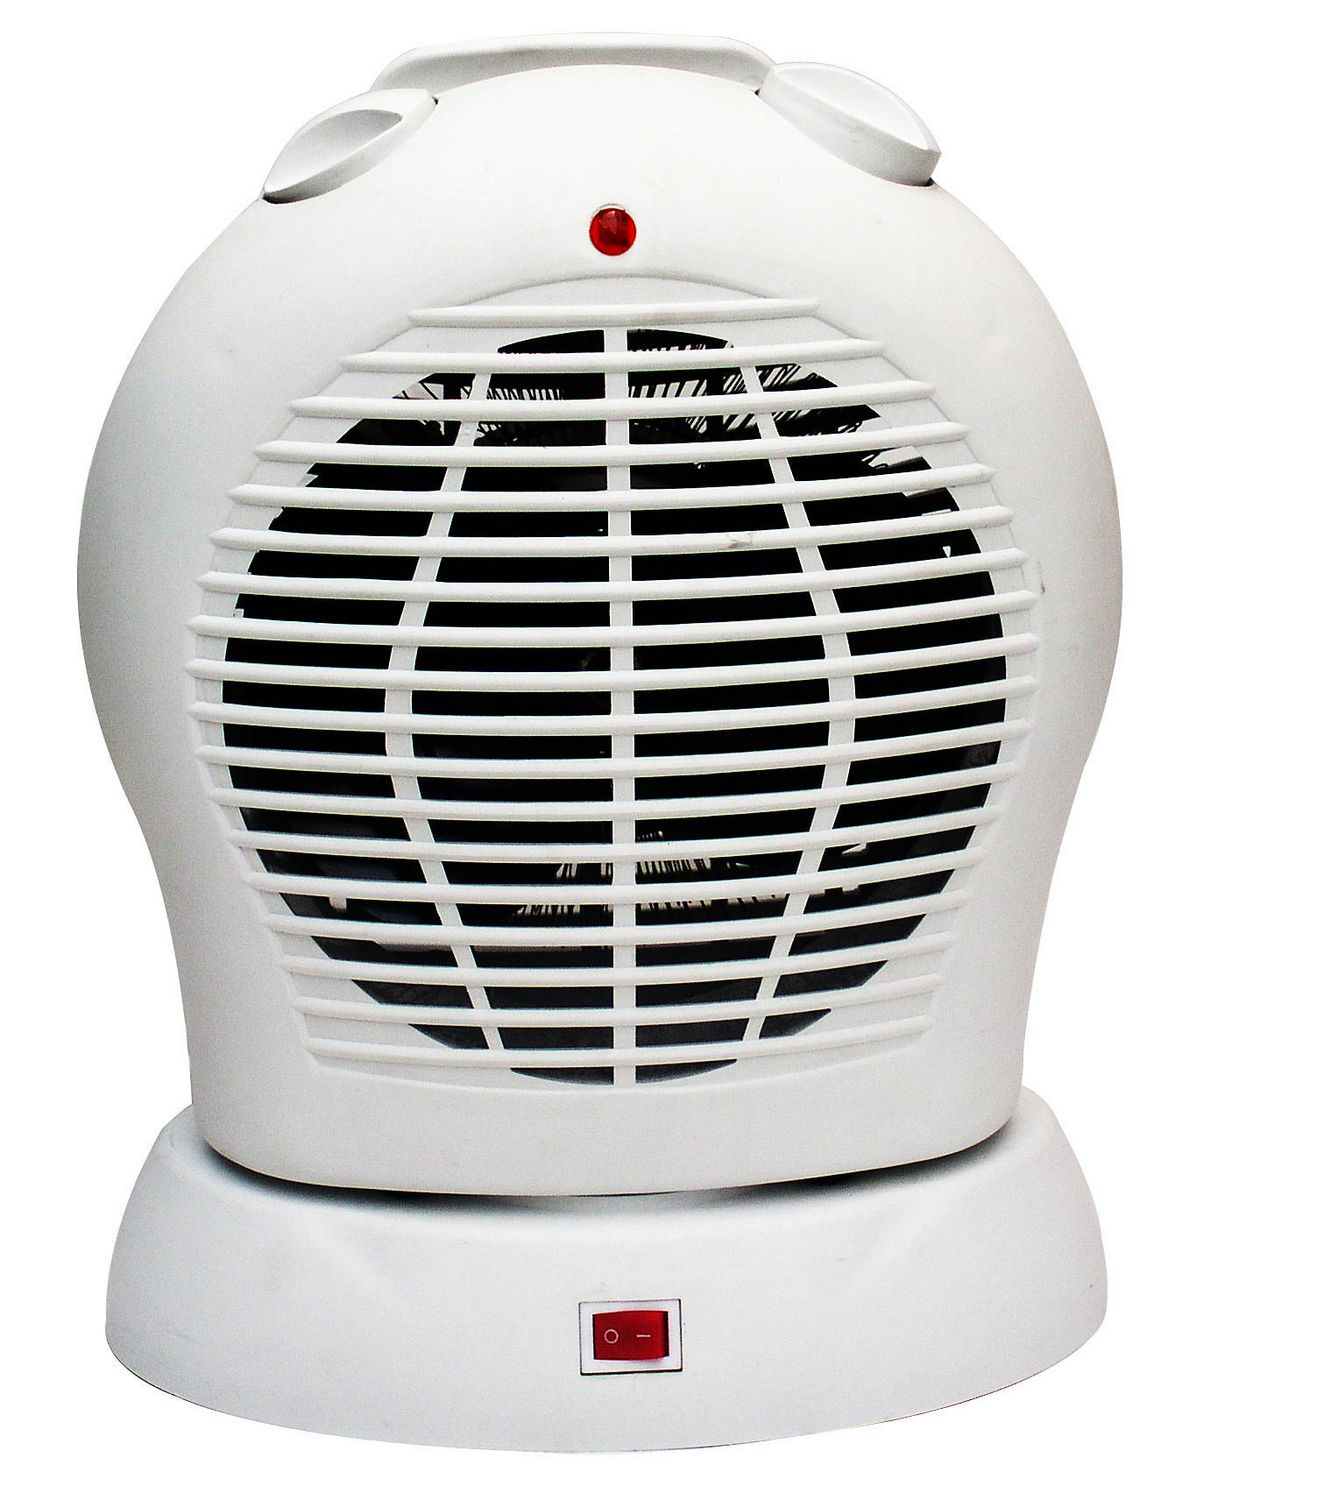 Mainstays Oscillating Electric Fan Heater pertaining to sizing 1331 X 1500